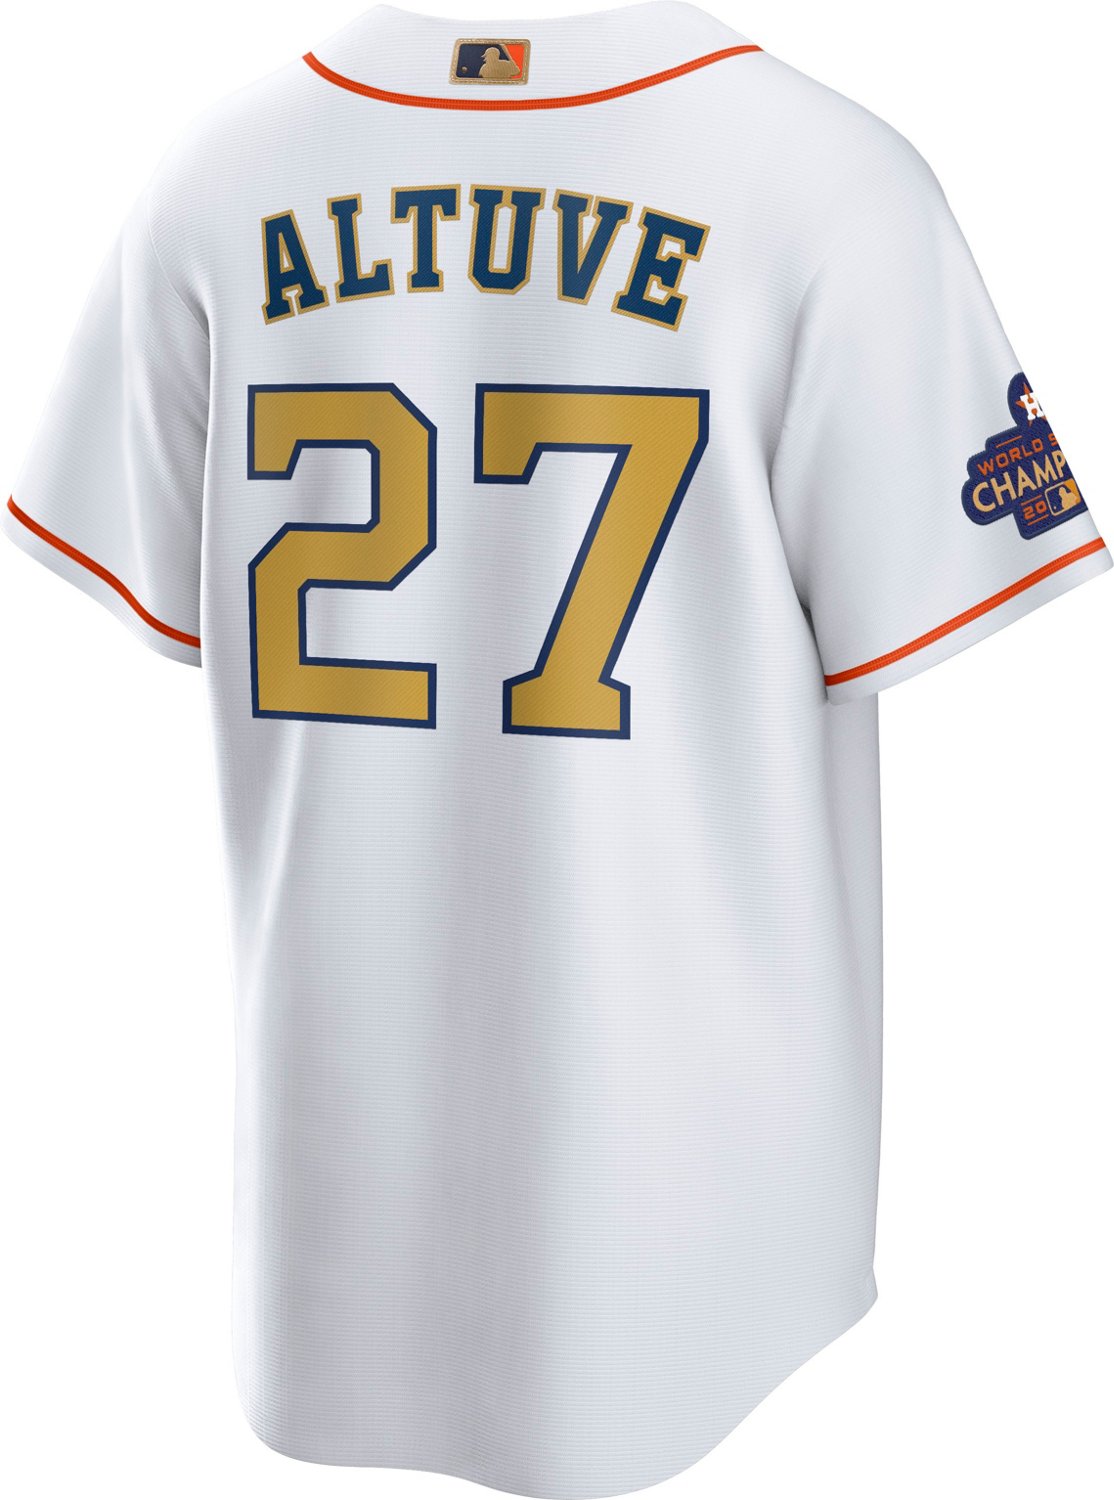 Academy to sell Astros Gold Rush uniforms, championship merchandise